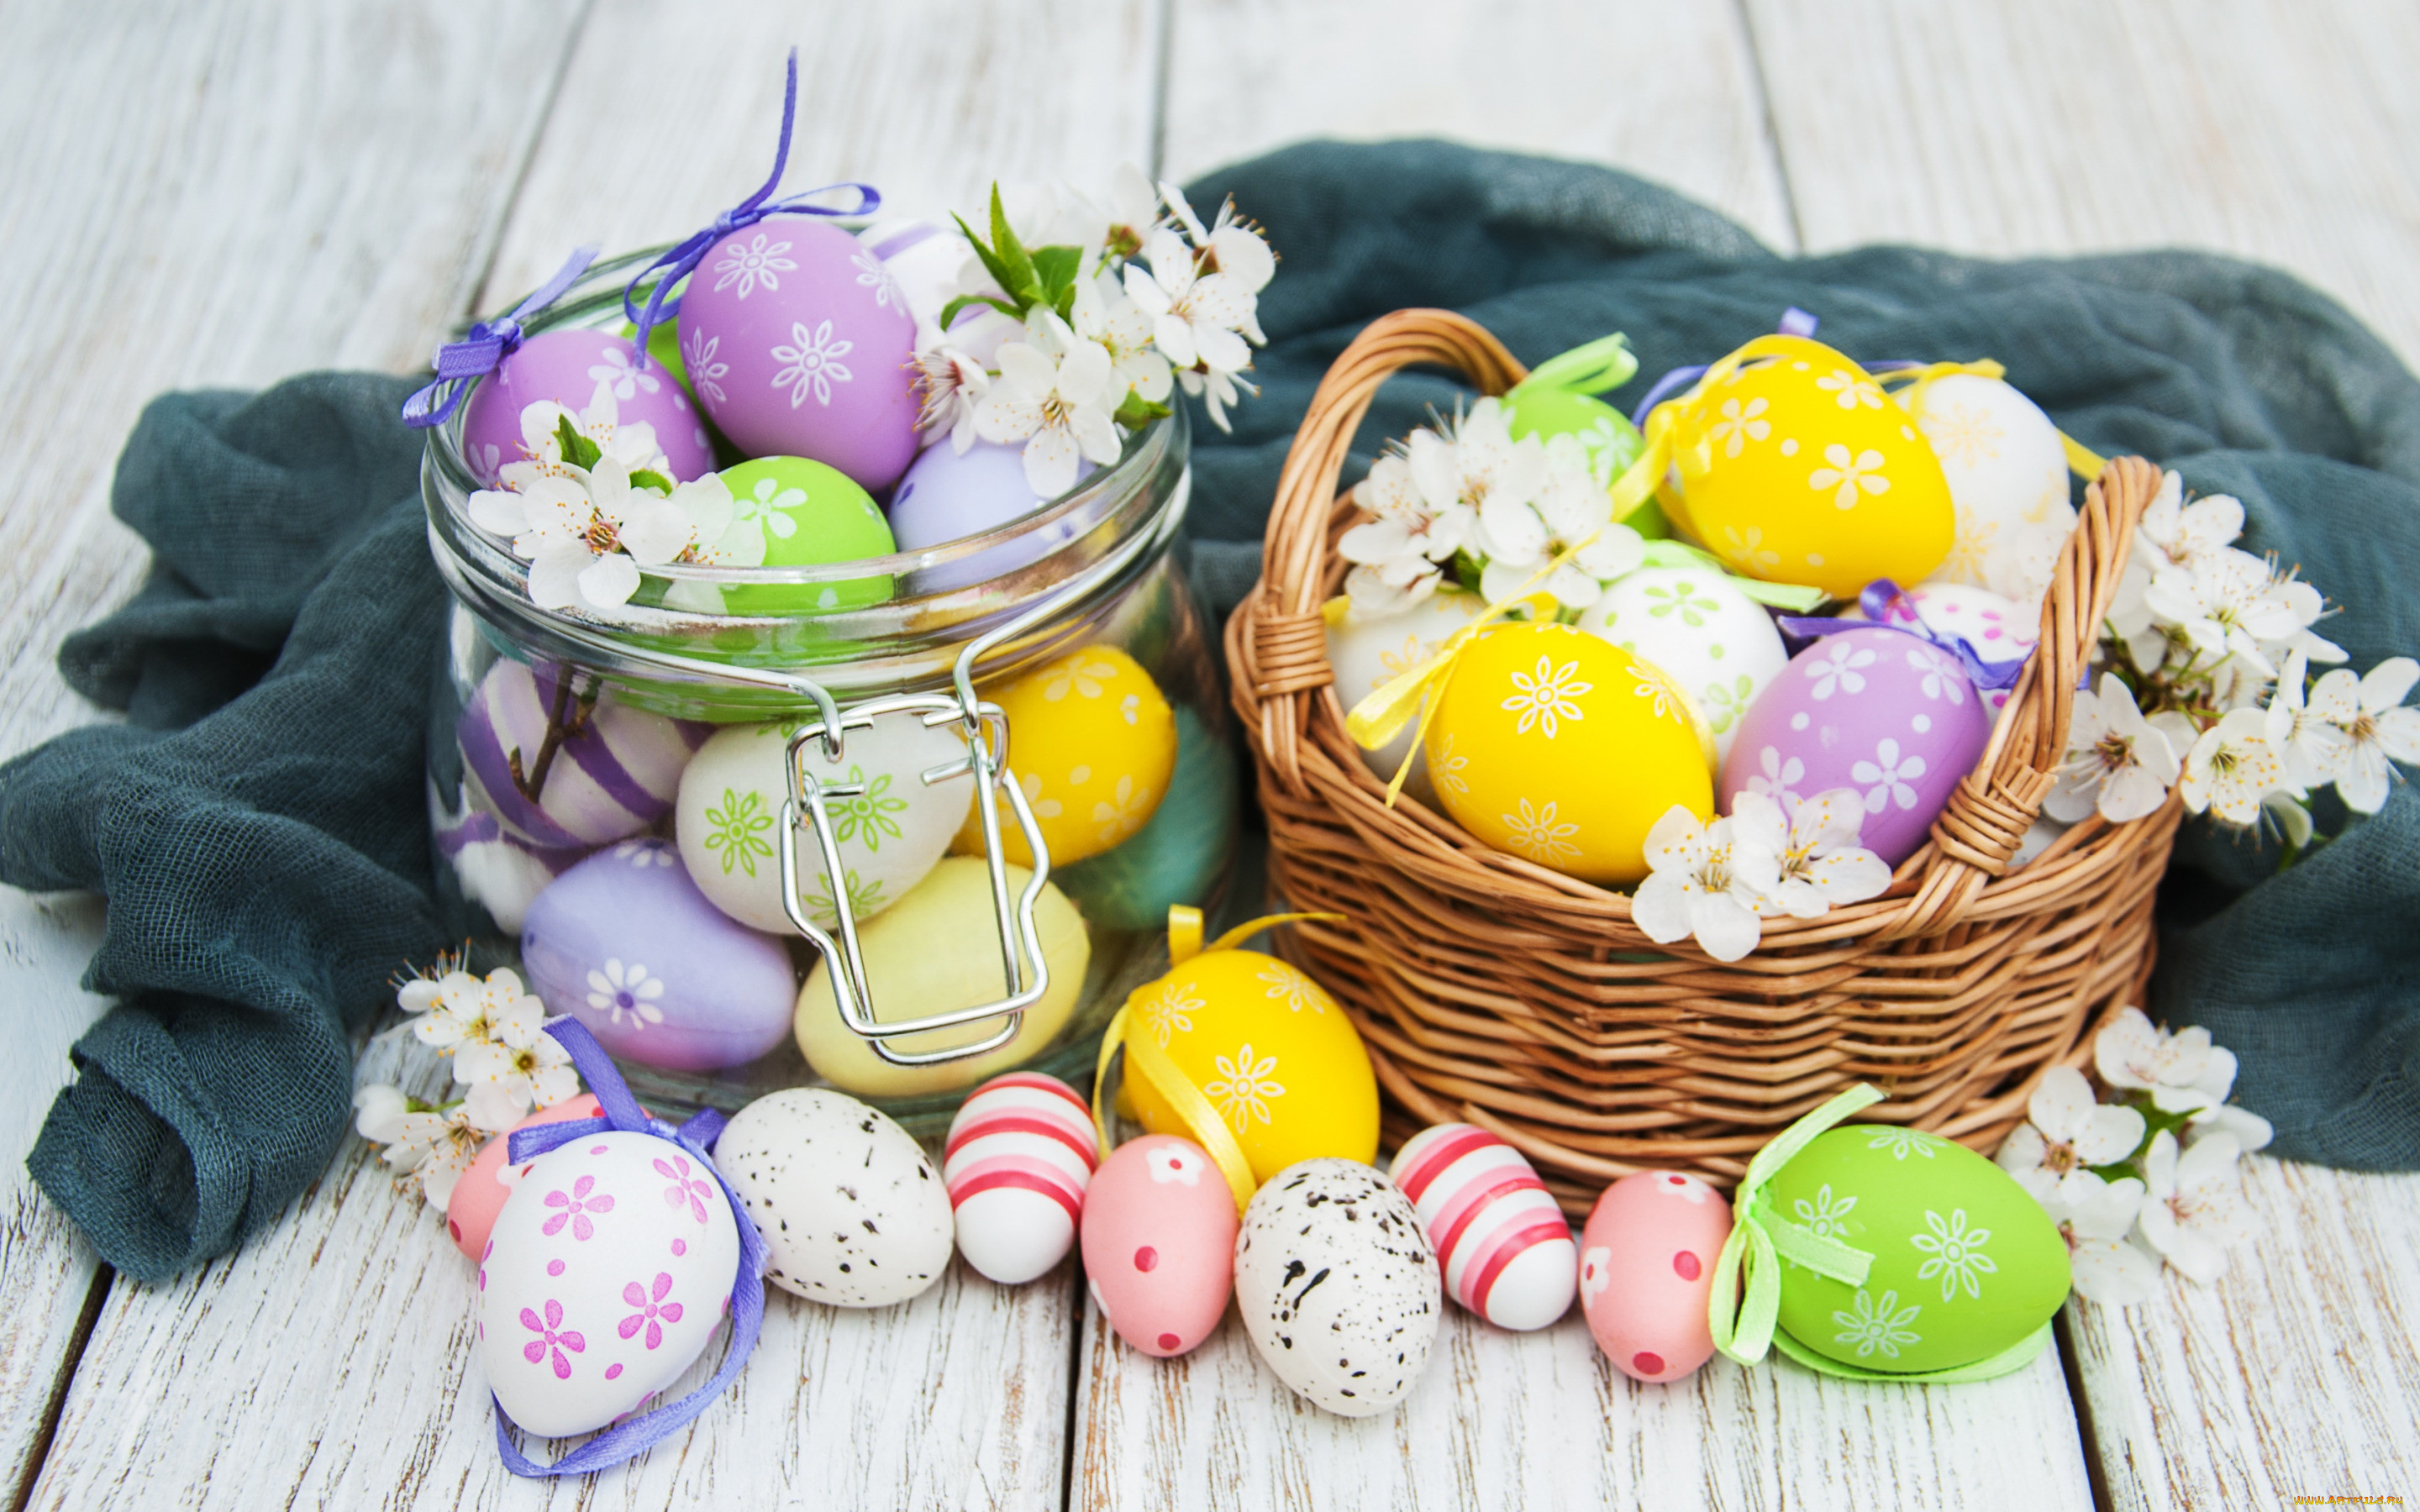 , , , , colorful, happy, wood, pink, blossom, flowers, spring, easter, eggs, decoration, basket